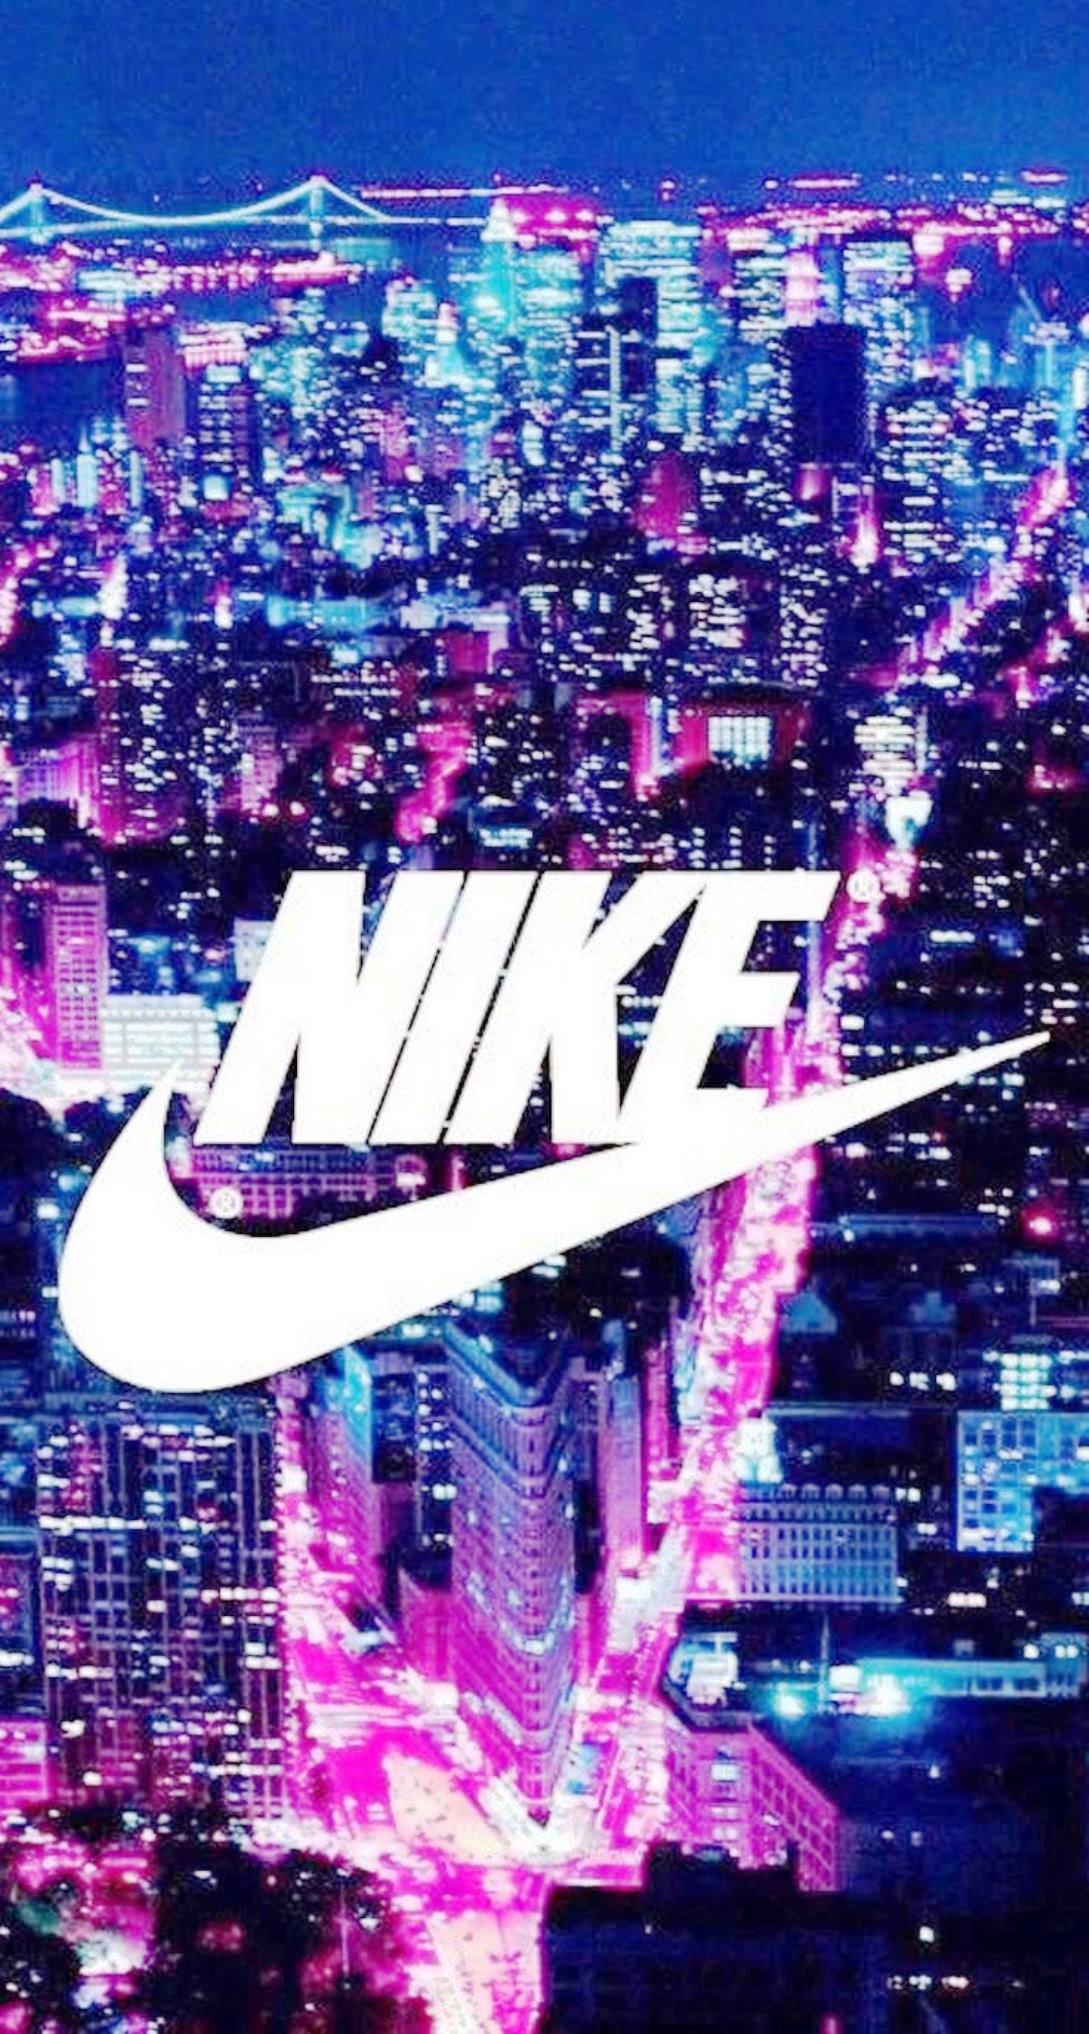 Really Cool Nike Backgrounds